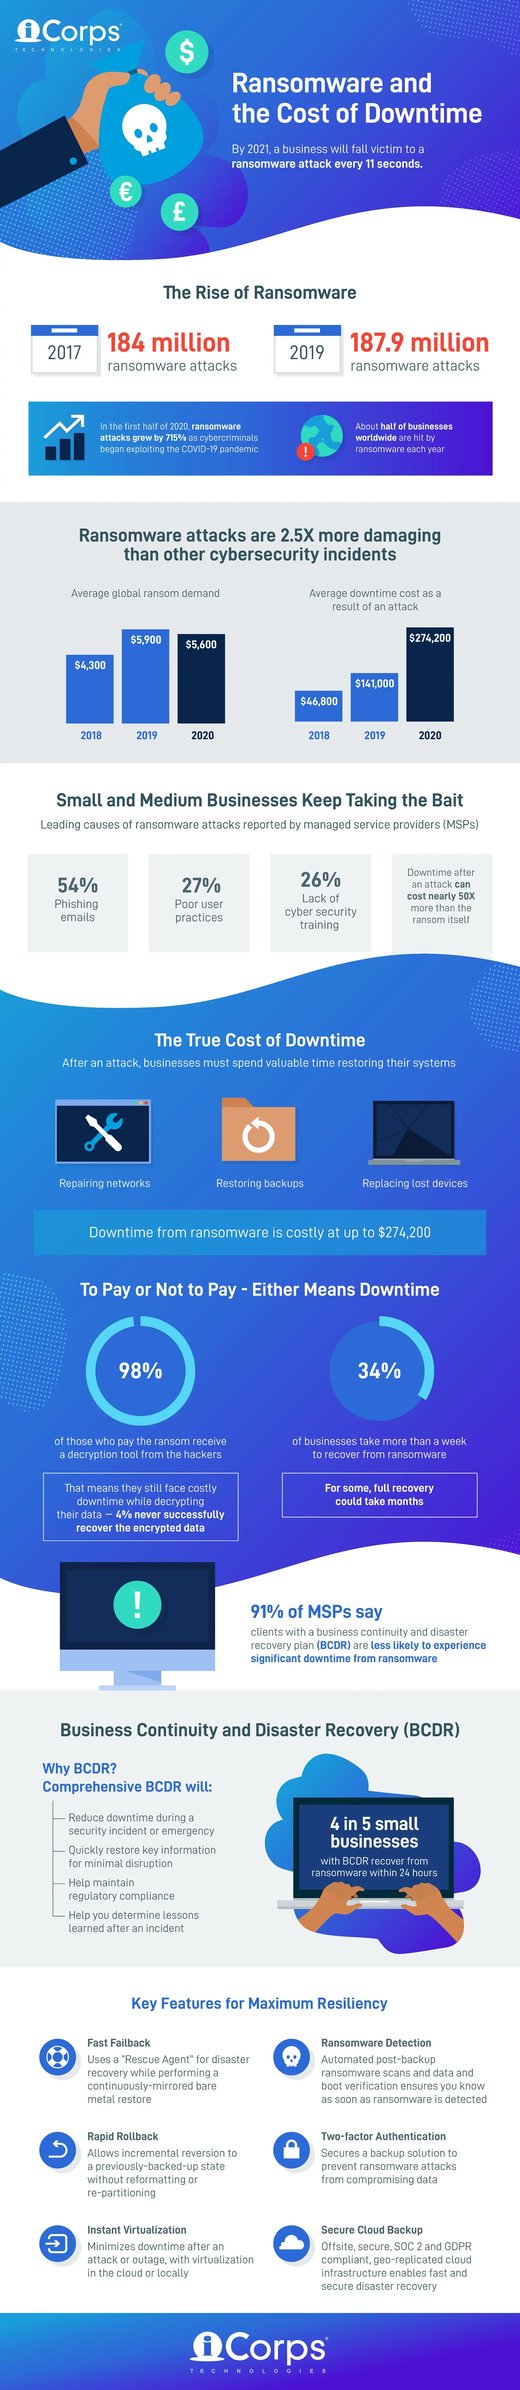 [INFOGRAPHIC] Ransomware and the Cost of Downtime